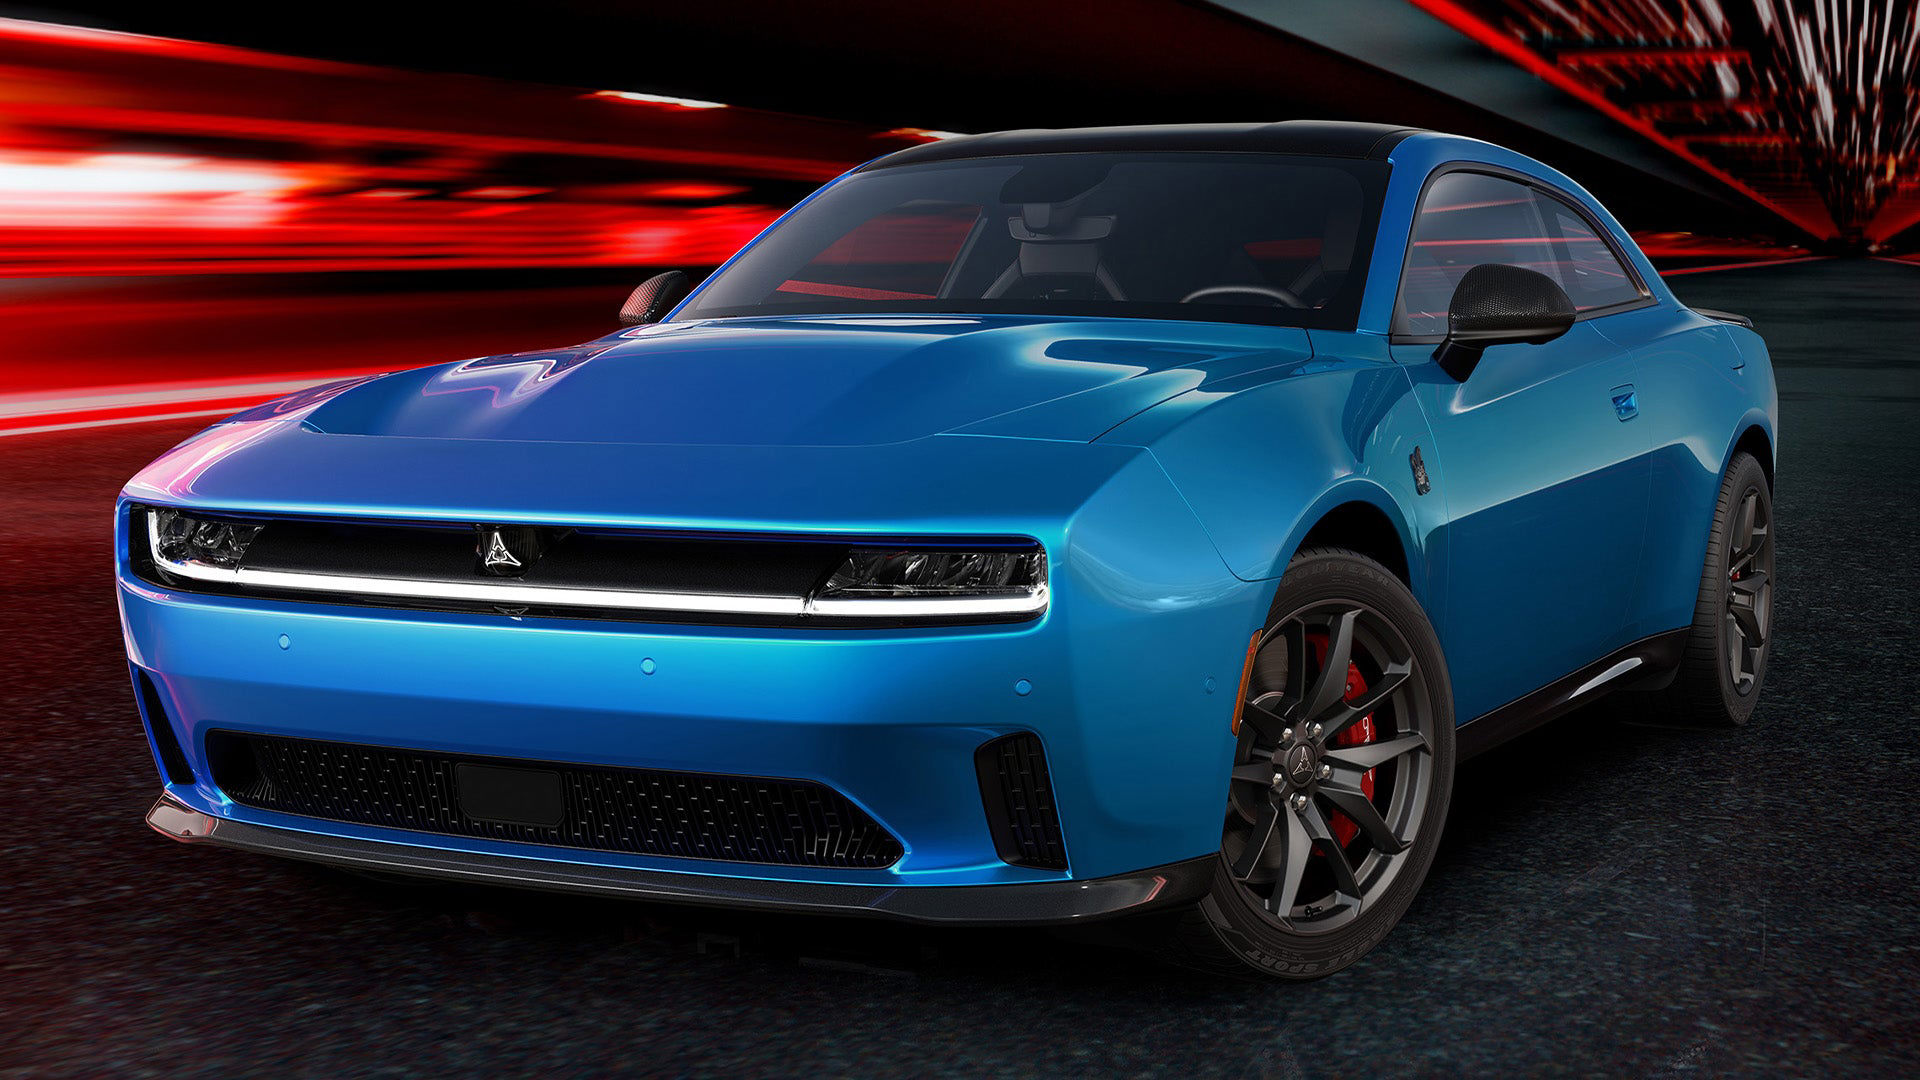 Even More Powerful Dodge Charger EV and ICE Models With 800+ HP Are Coming